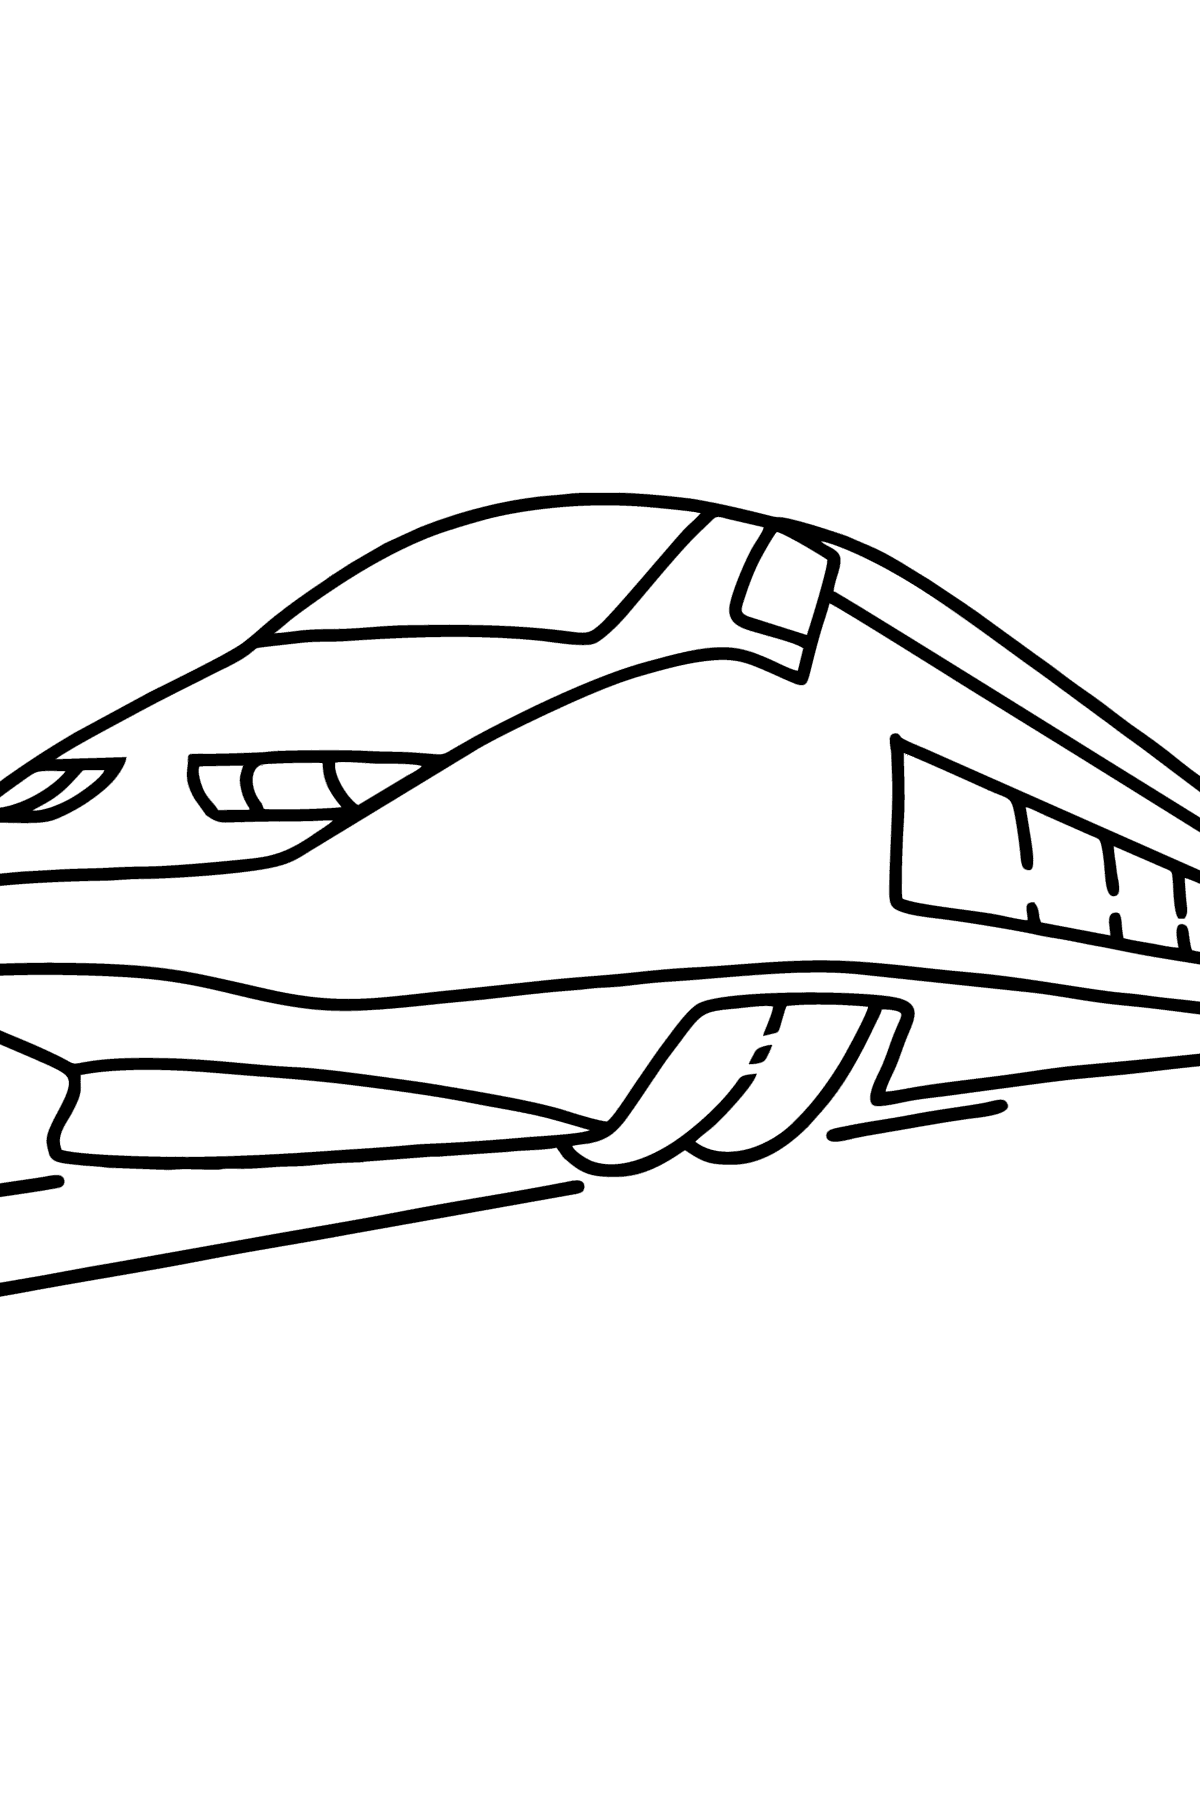 Train coloring page for kids - Coloring Pages for Kids